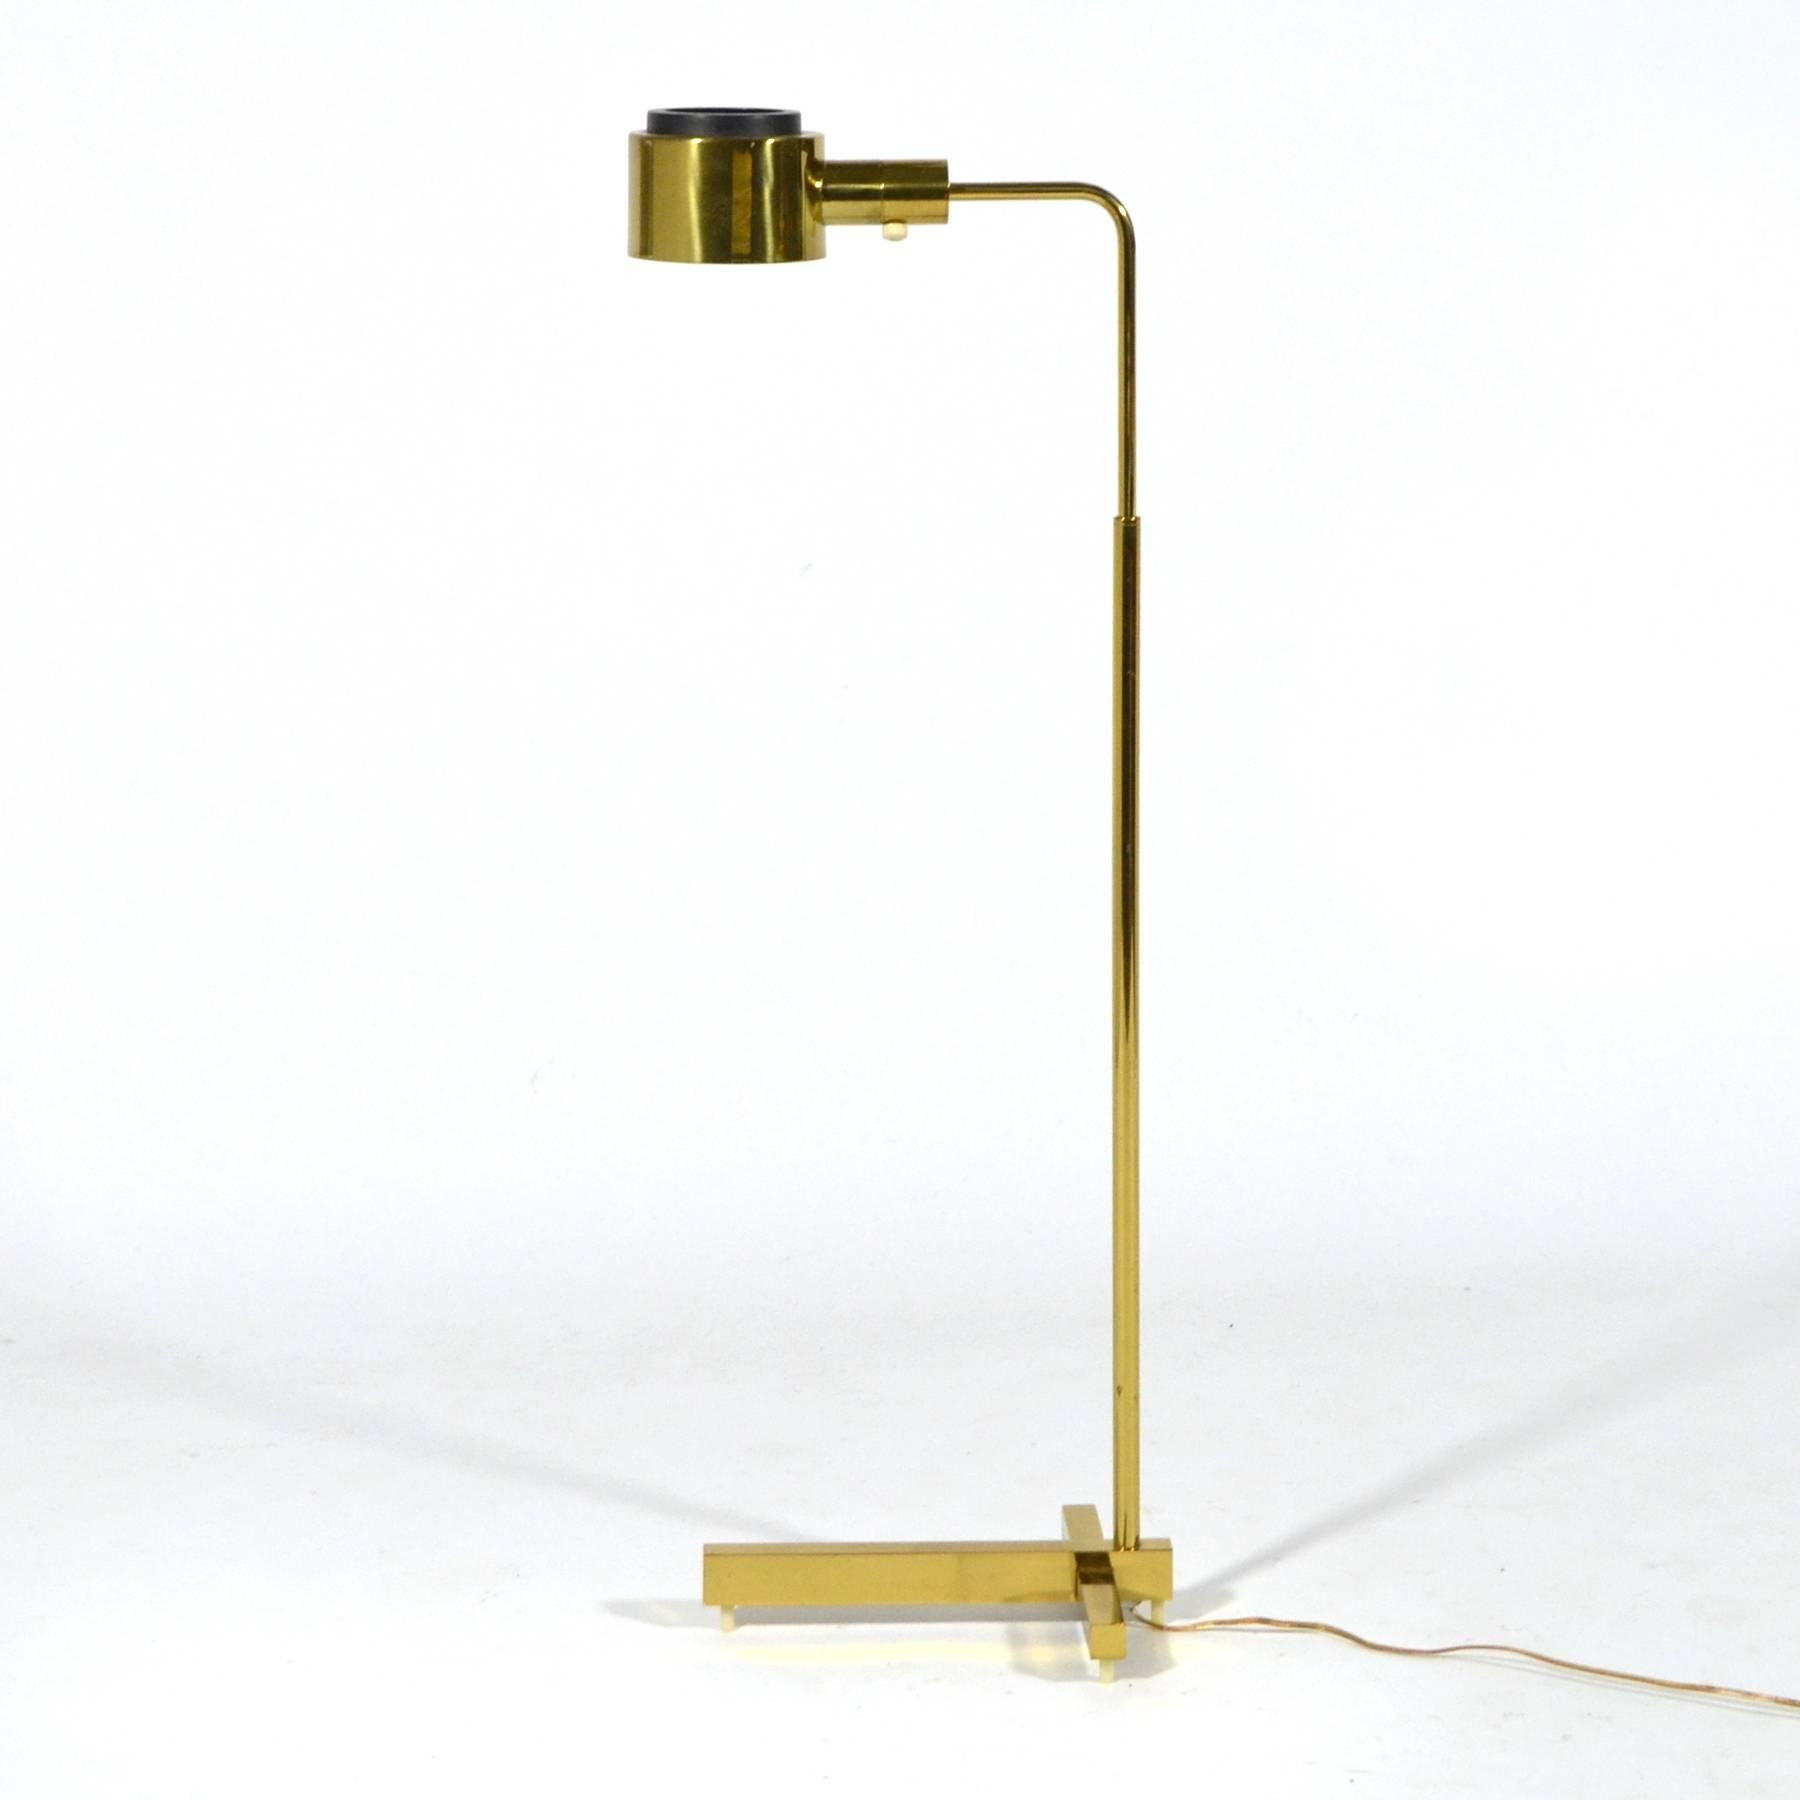 Casella Adjustable Pharmacy Floor Lamp In Brass At 1stdibs intended for sizing 1800 X 1800